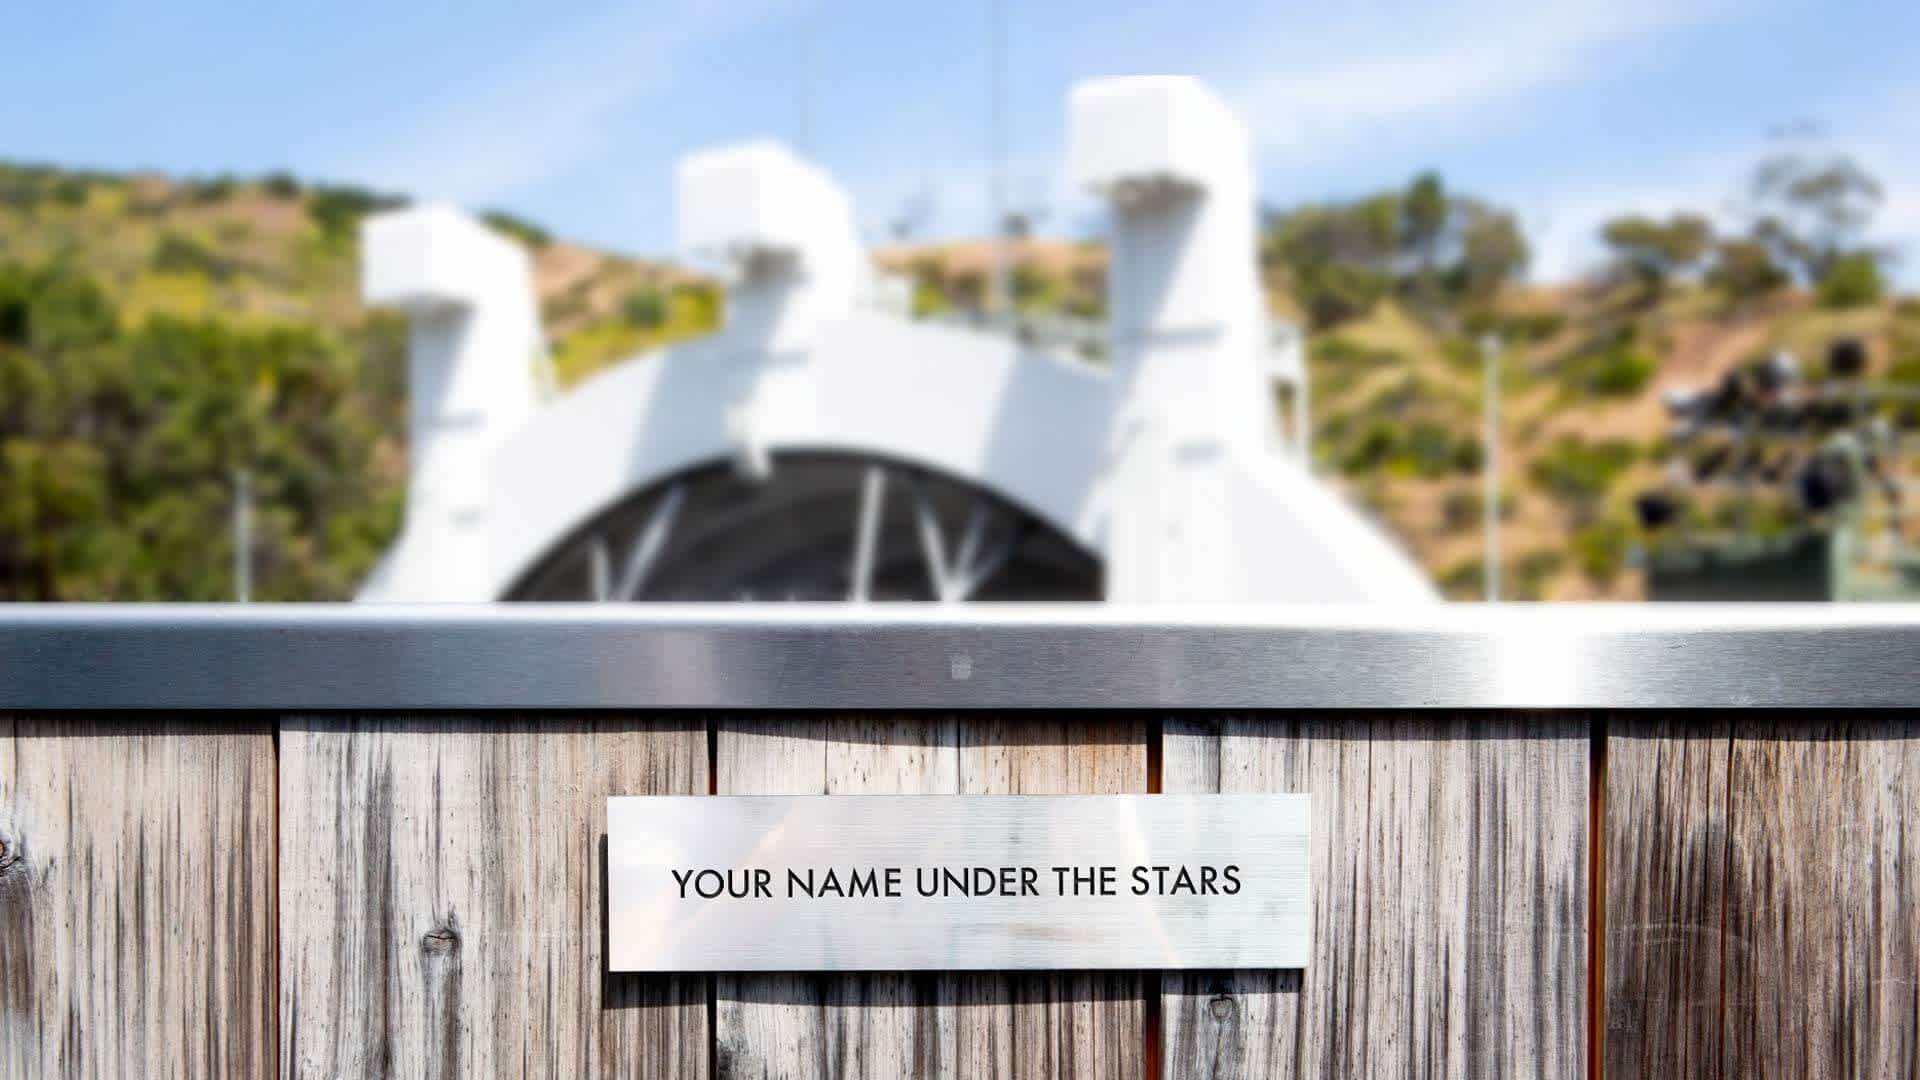 A sample “Your Name Under the Stars” plaque at the Hollywood Bowl